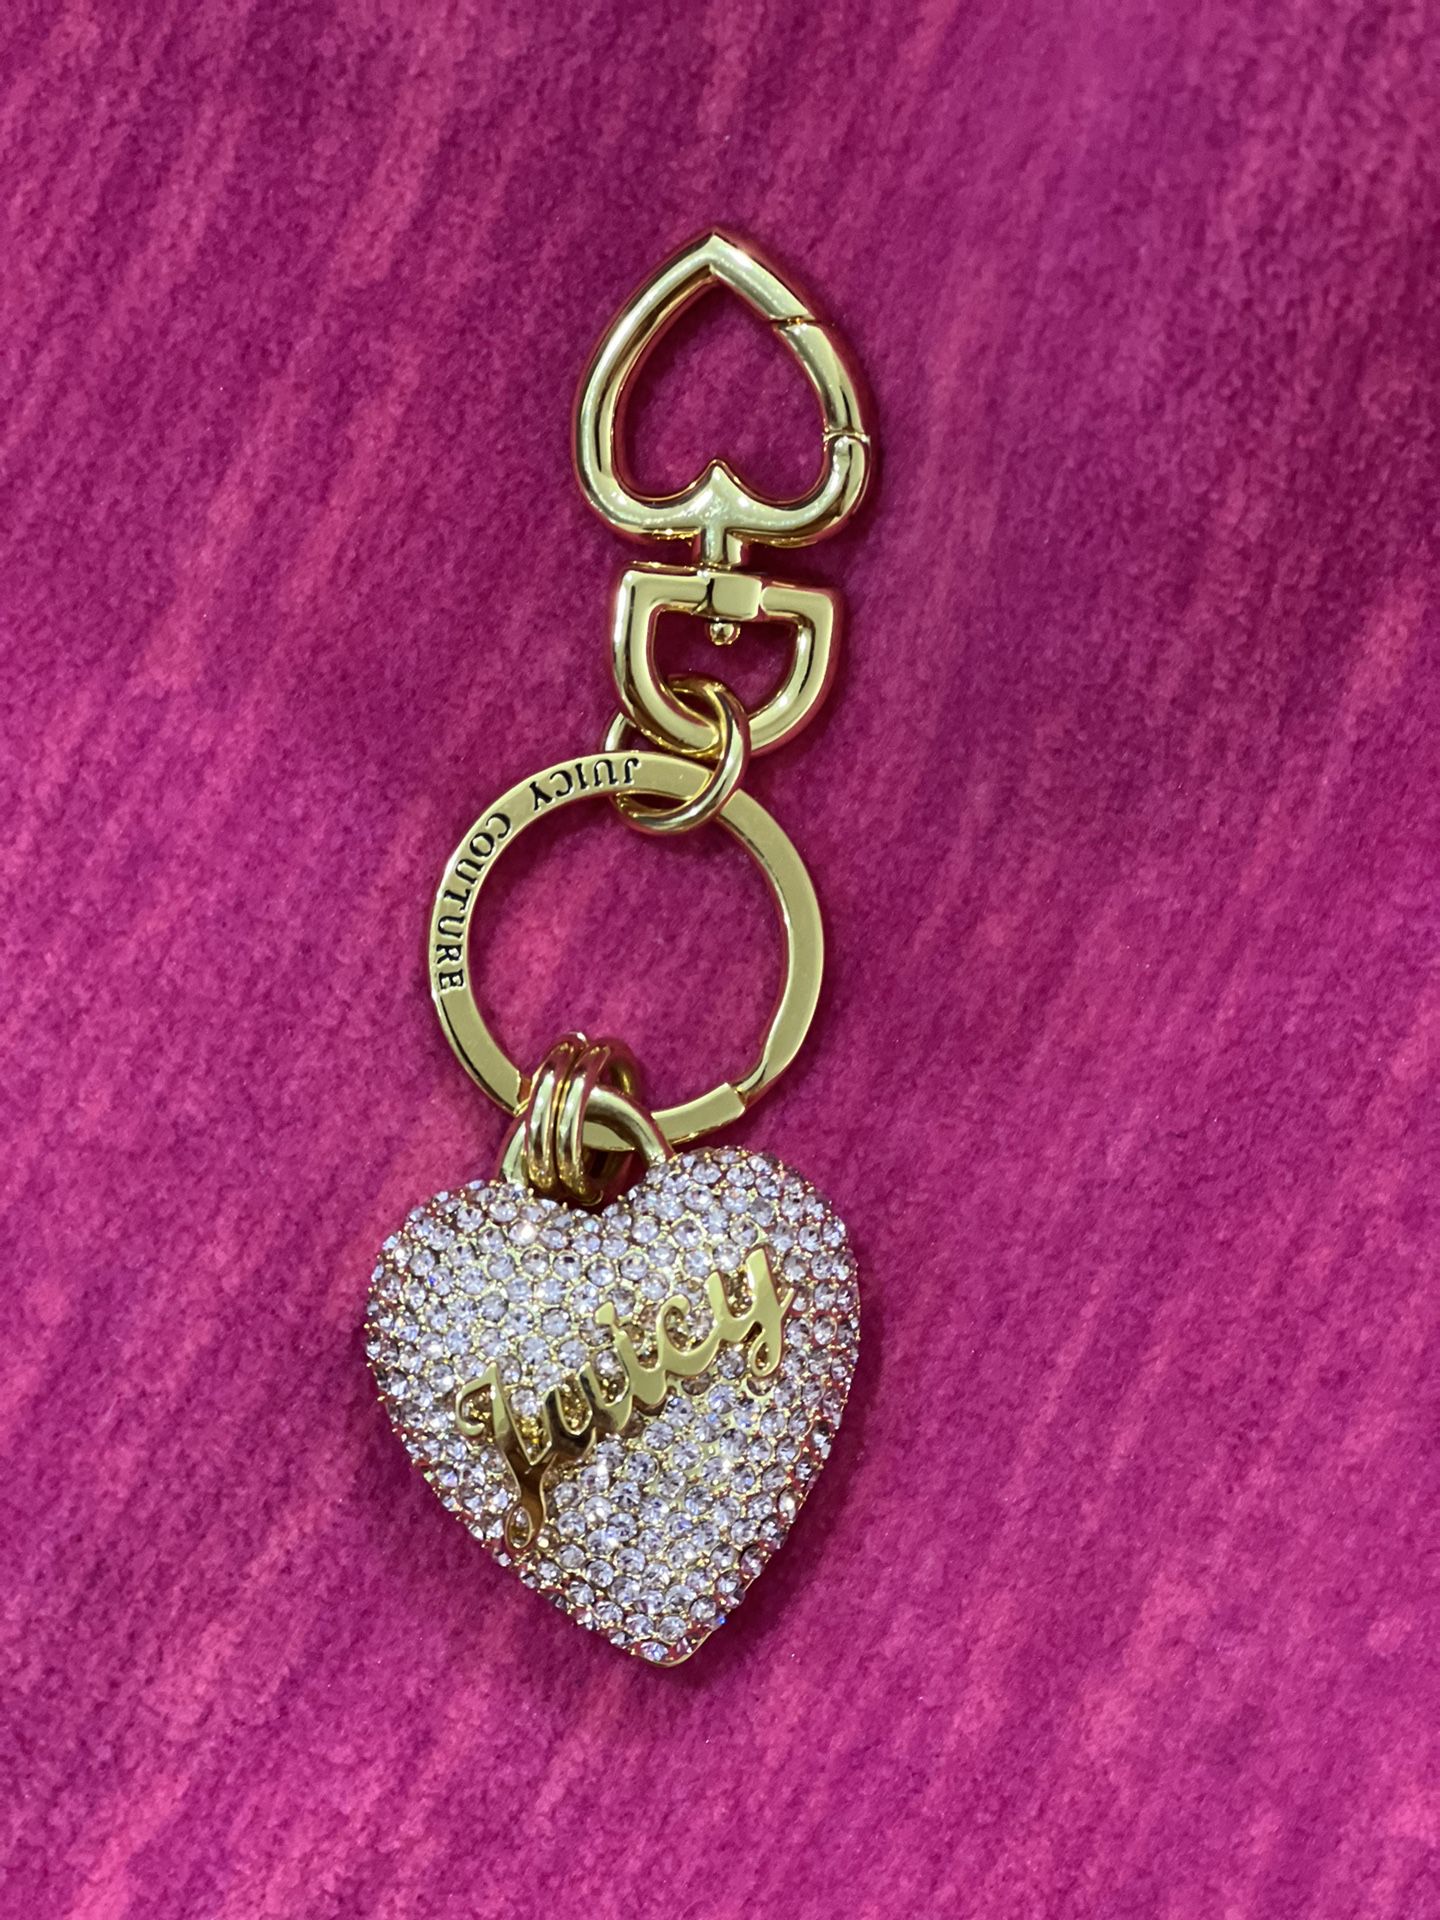 Juicy Couture Keychain 